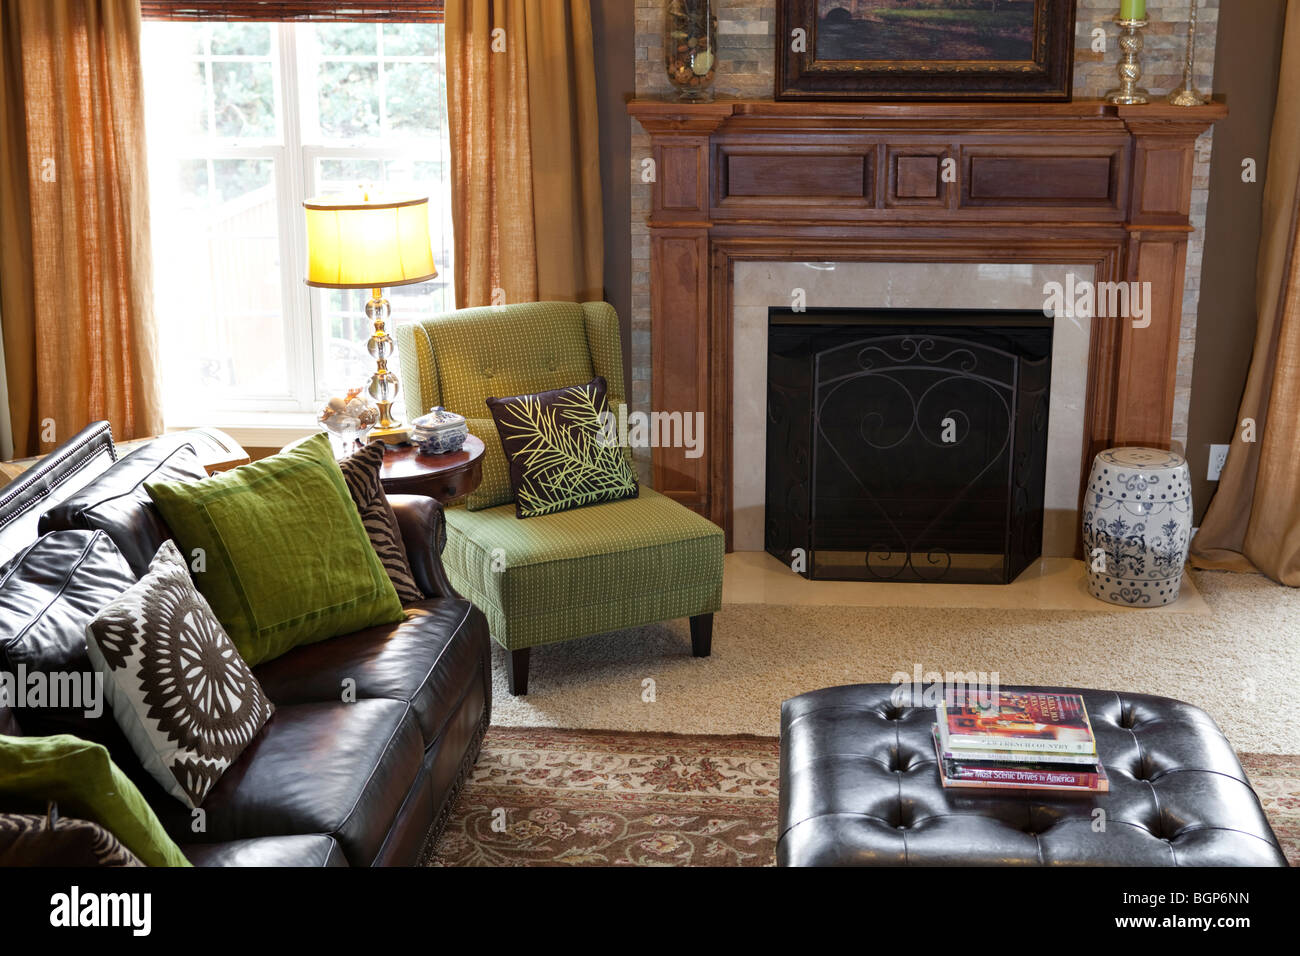 Sitting room with leather sofa and coffee table, upholstered fabric armchair, fireplace and carpeted floor Stock Photo